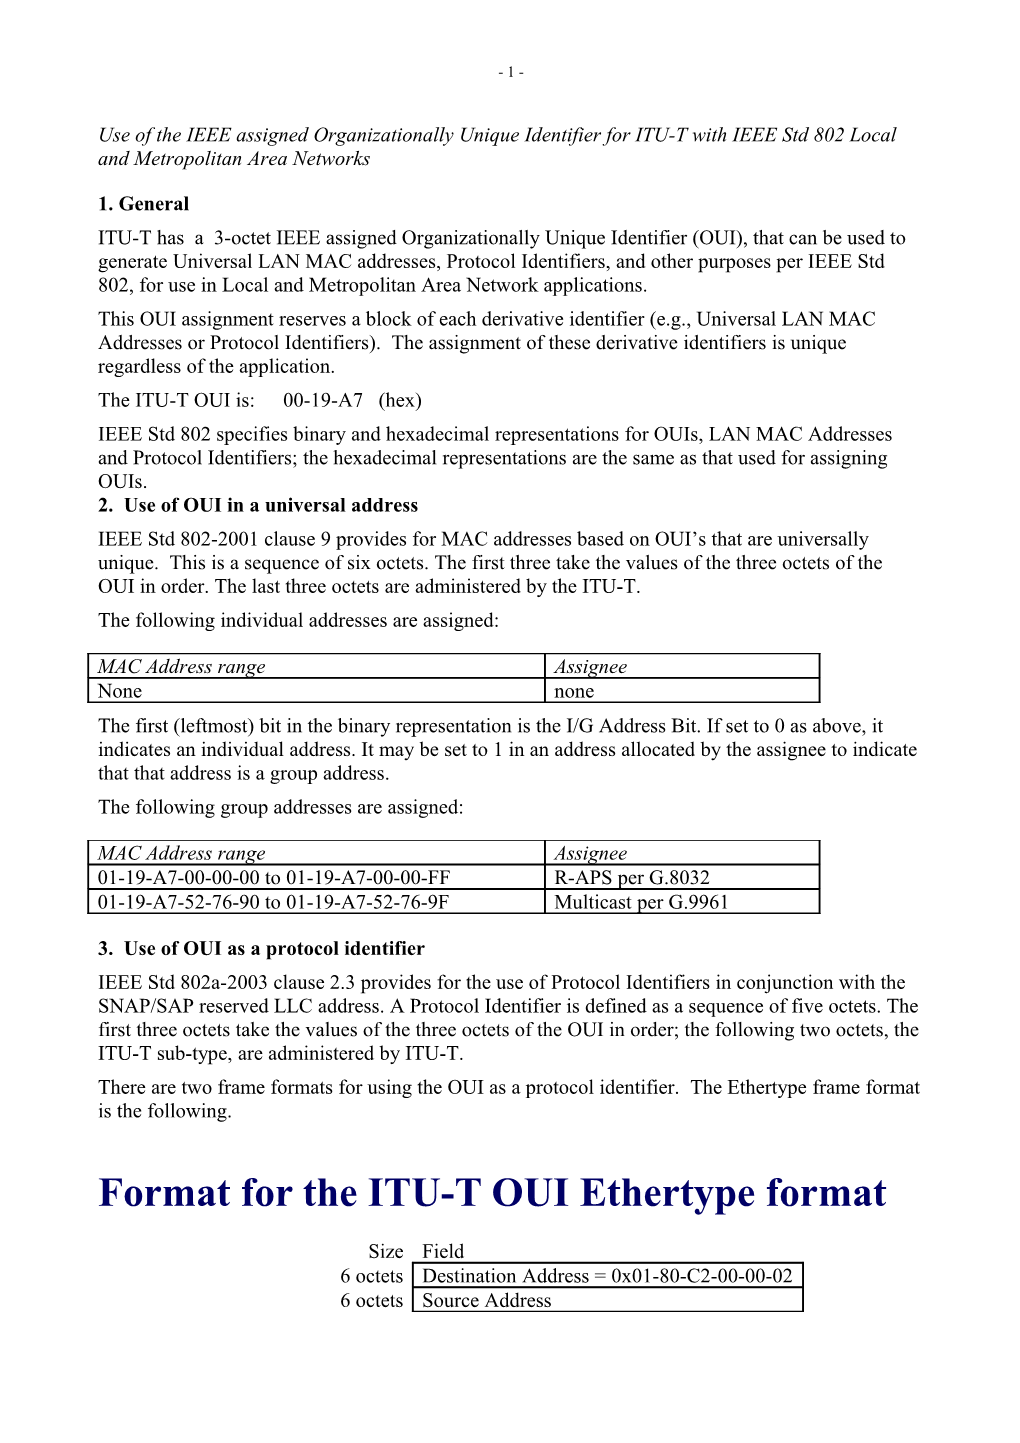 Use of the IEEE Assigned Organizationally Unique Identifier for ITU-T with IEEE Std 802